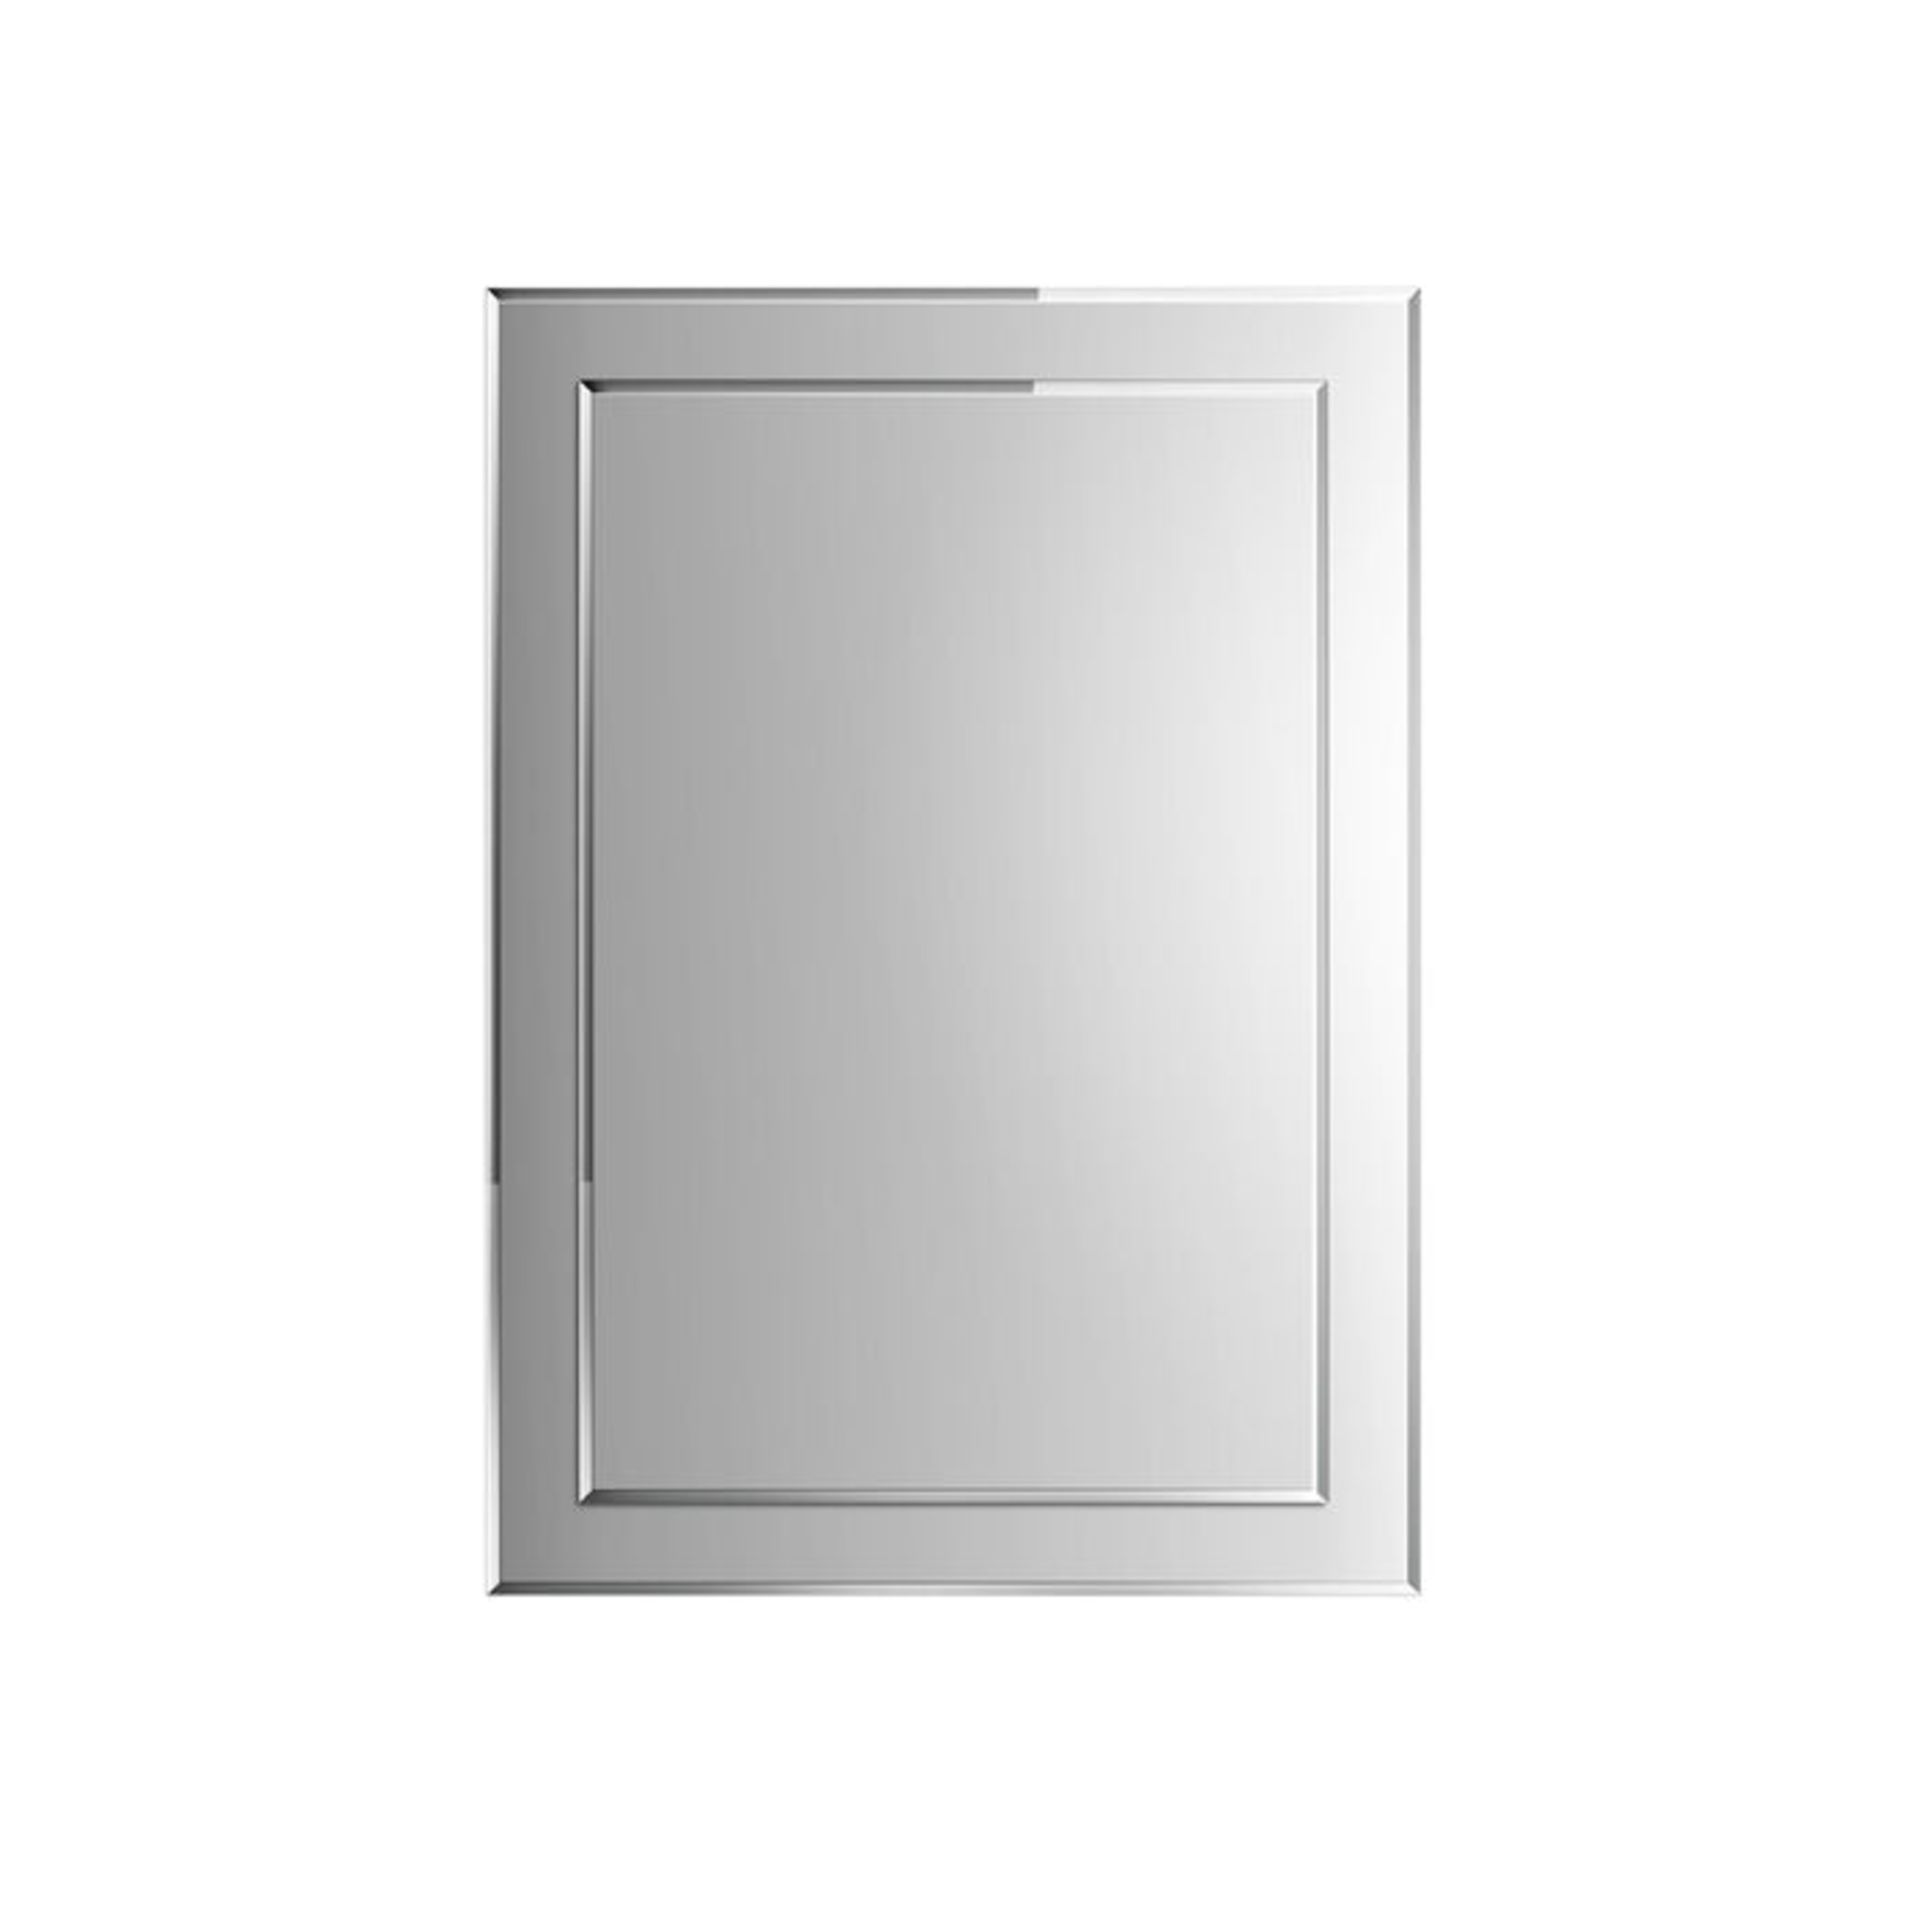 (MQ100) 500x700mm Bevel Mirror. RRP £75.00. Comes fully assembled for added convenience Versa... - Image 2 of 2